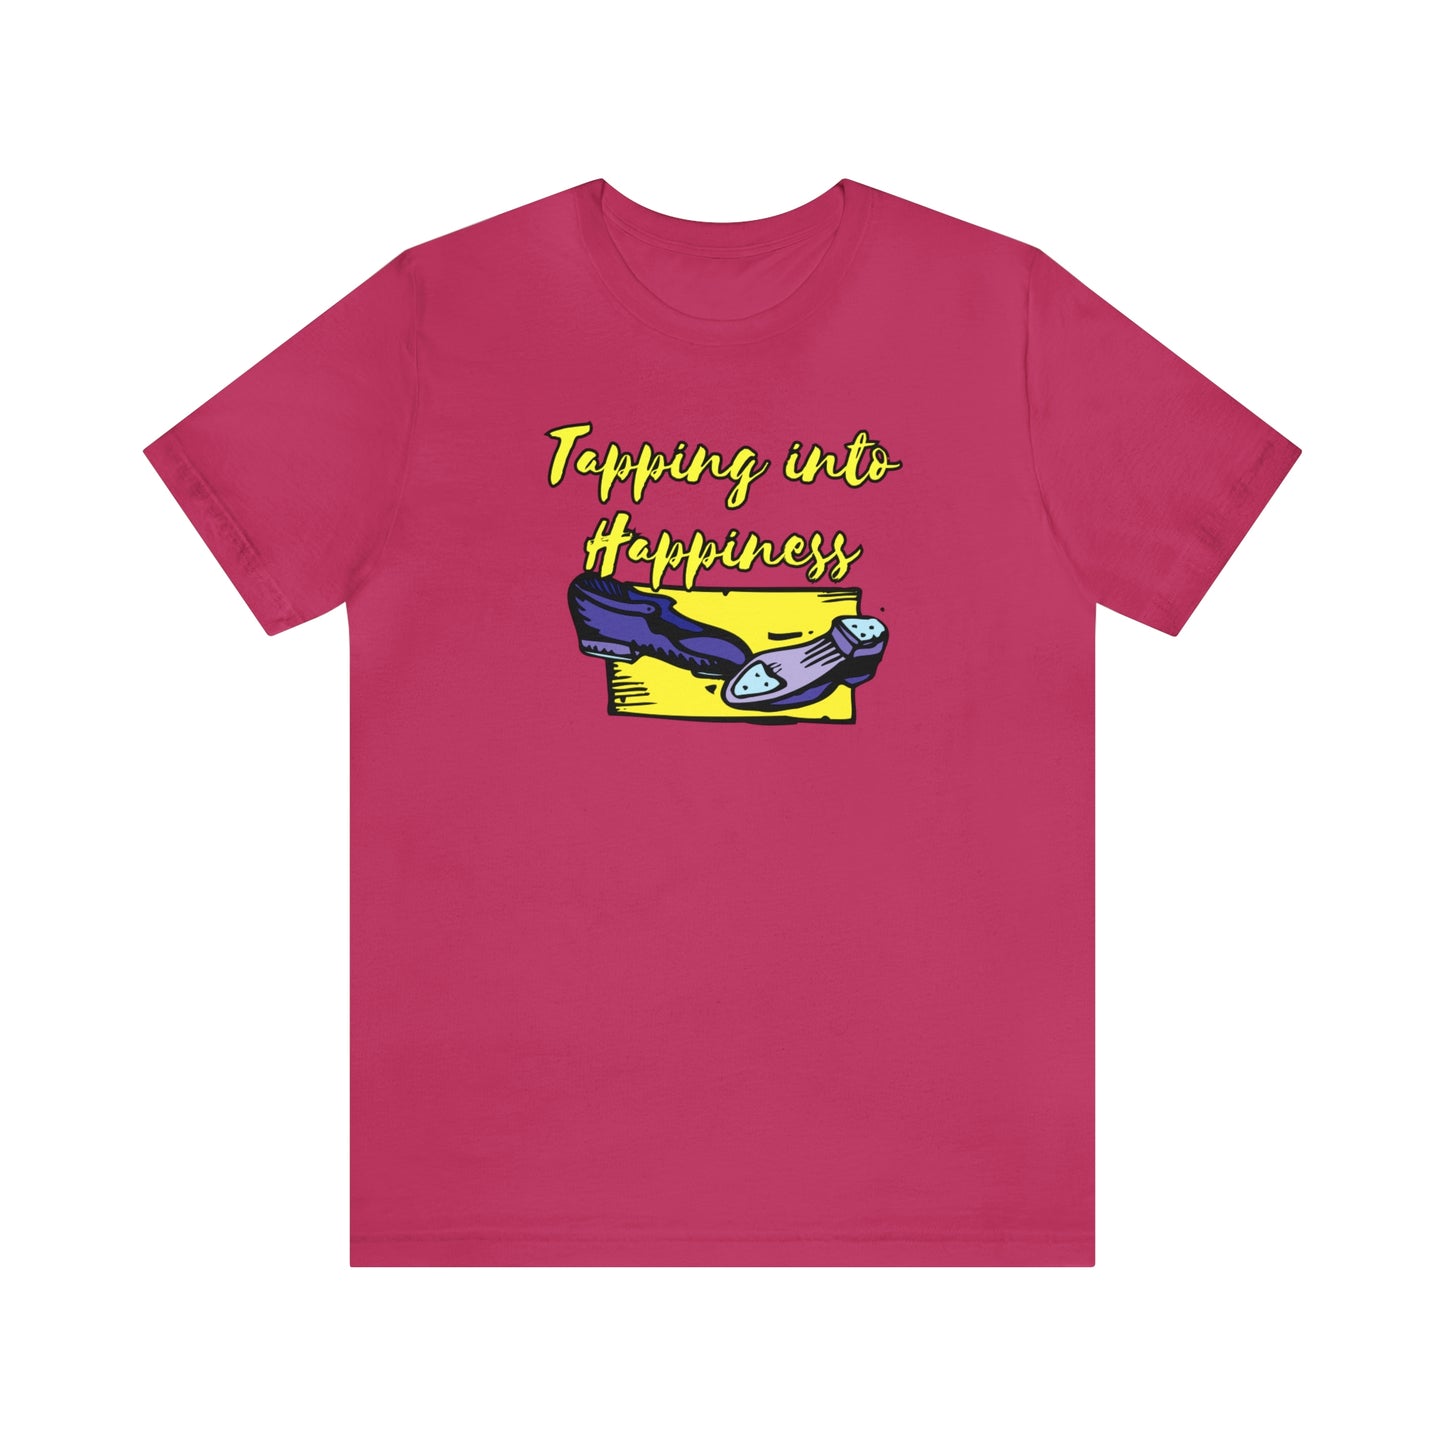 A tap dance tshirt with the text "Tapping into happines" and a picture of tap dance shoes. Great for tap dancers!